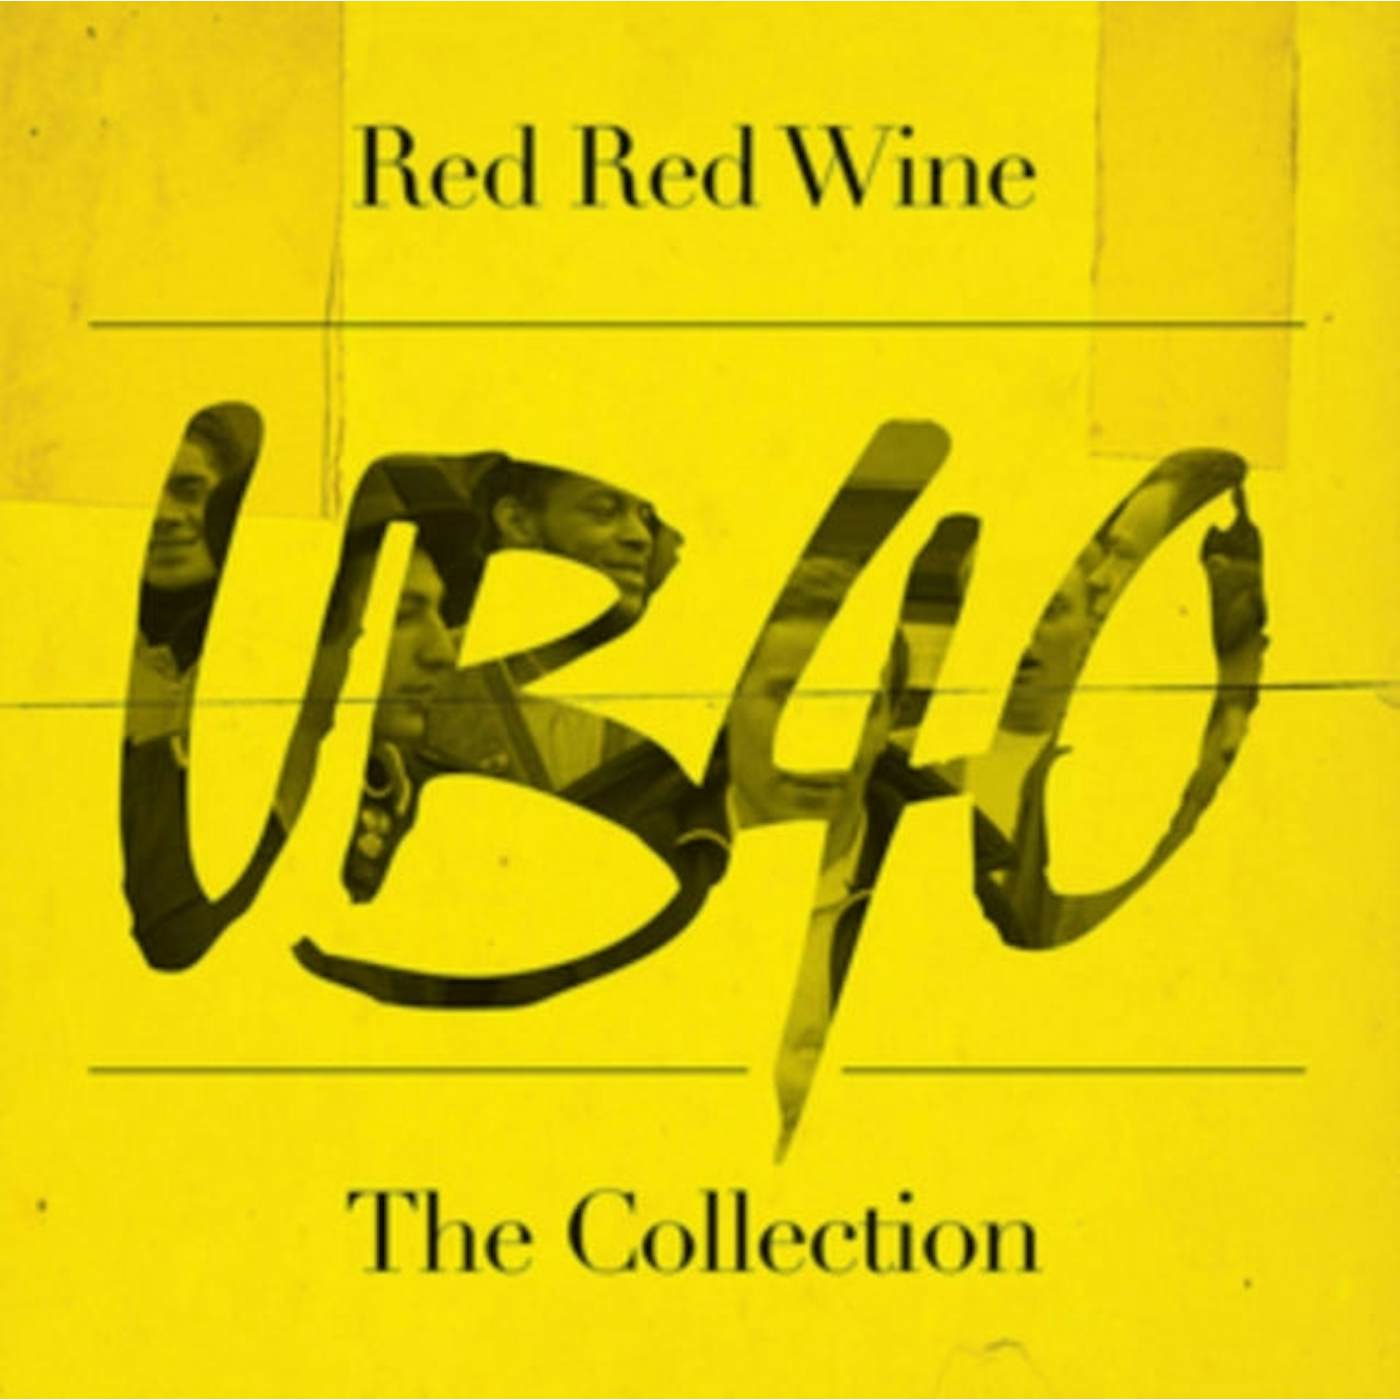 Ub40 LP Vinyl Record - Red Red Wine - The Collection